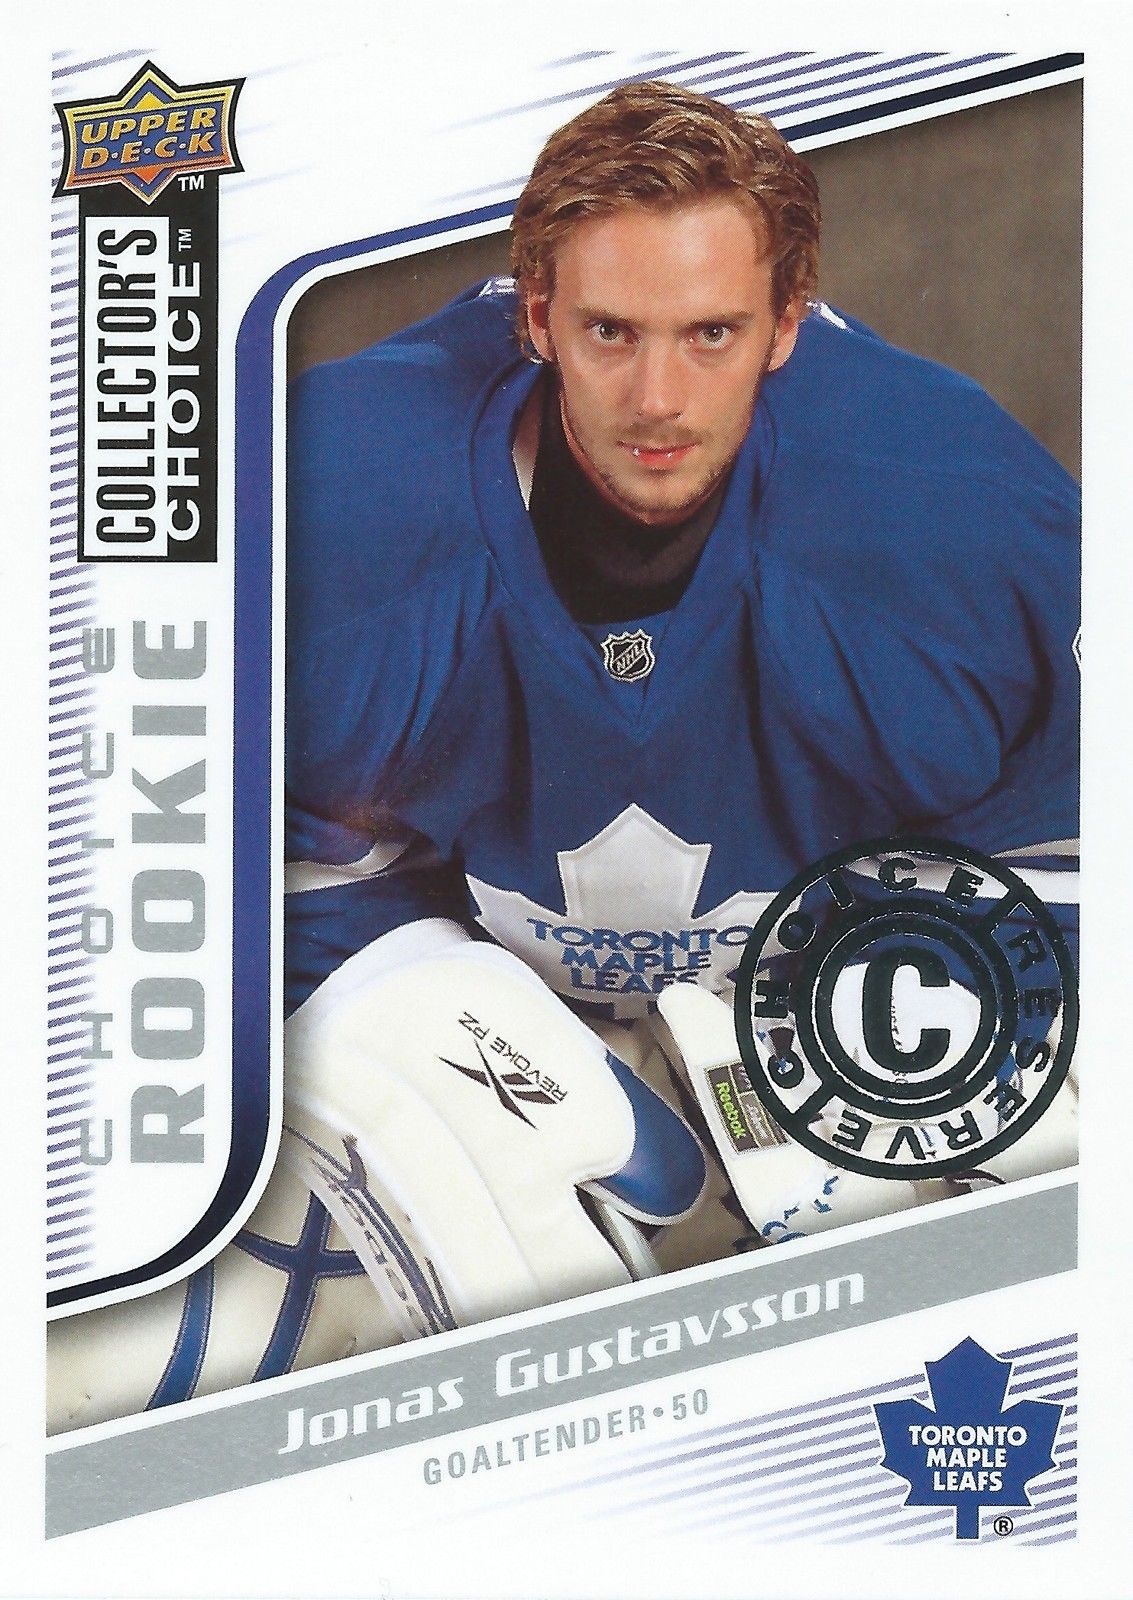  2009-10 Collector's Choice Reserve JONAS GUSTAVSSON $20 Rookie RC 00885 Image 1